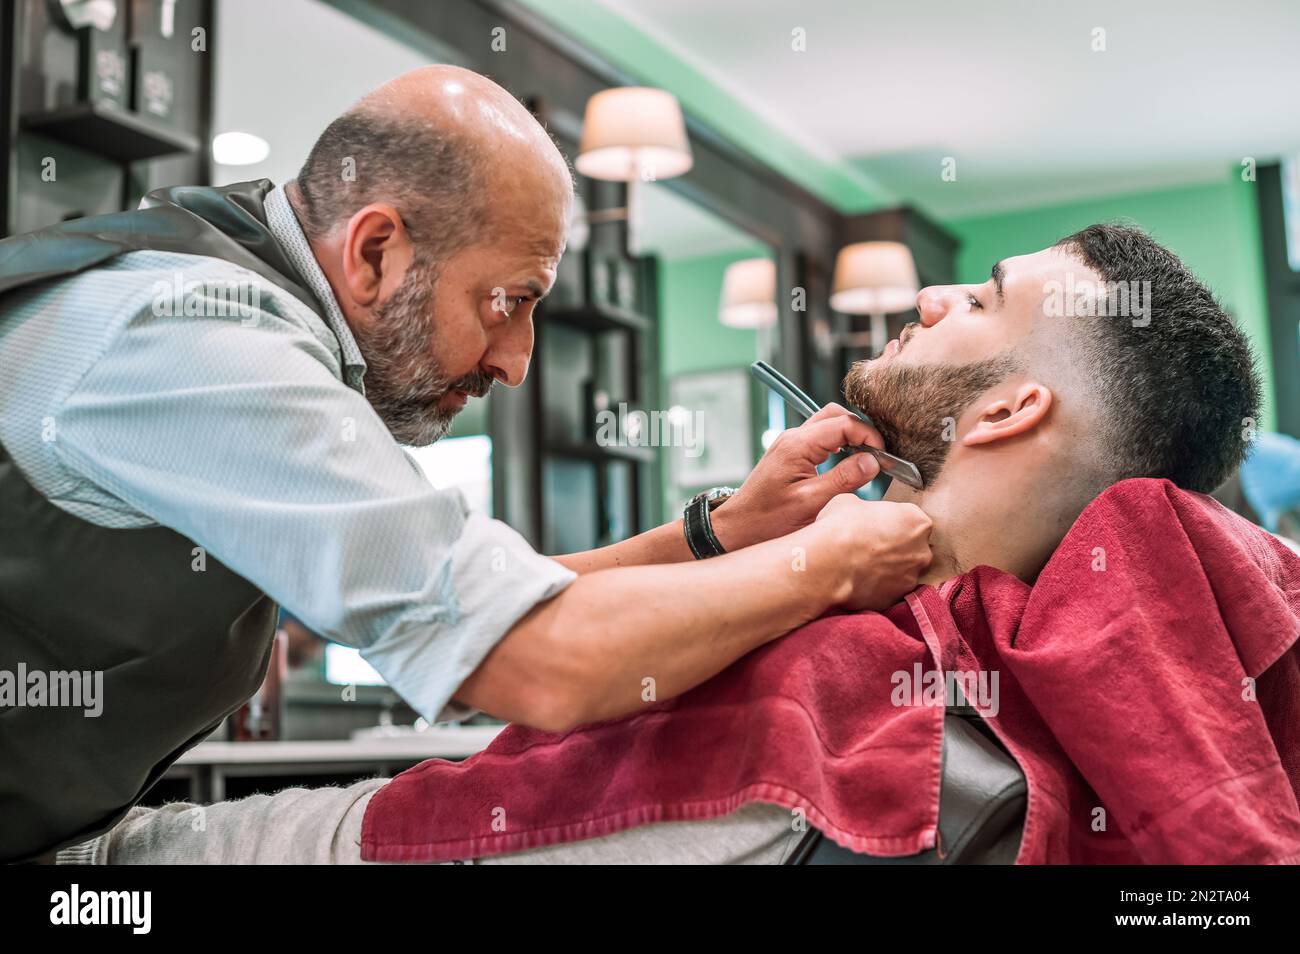 Side view of focused attentive barber using blade shaving razor on male client adjusting beard in barbershop Stock Photo